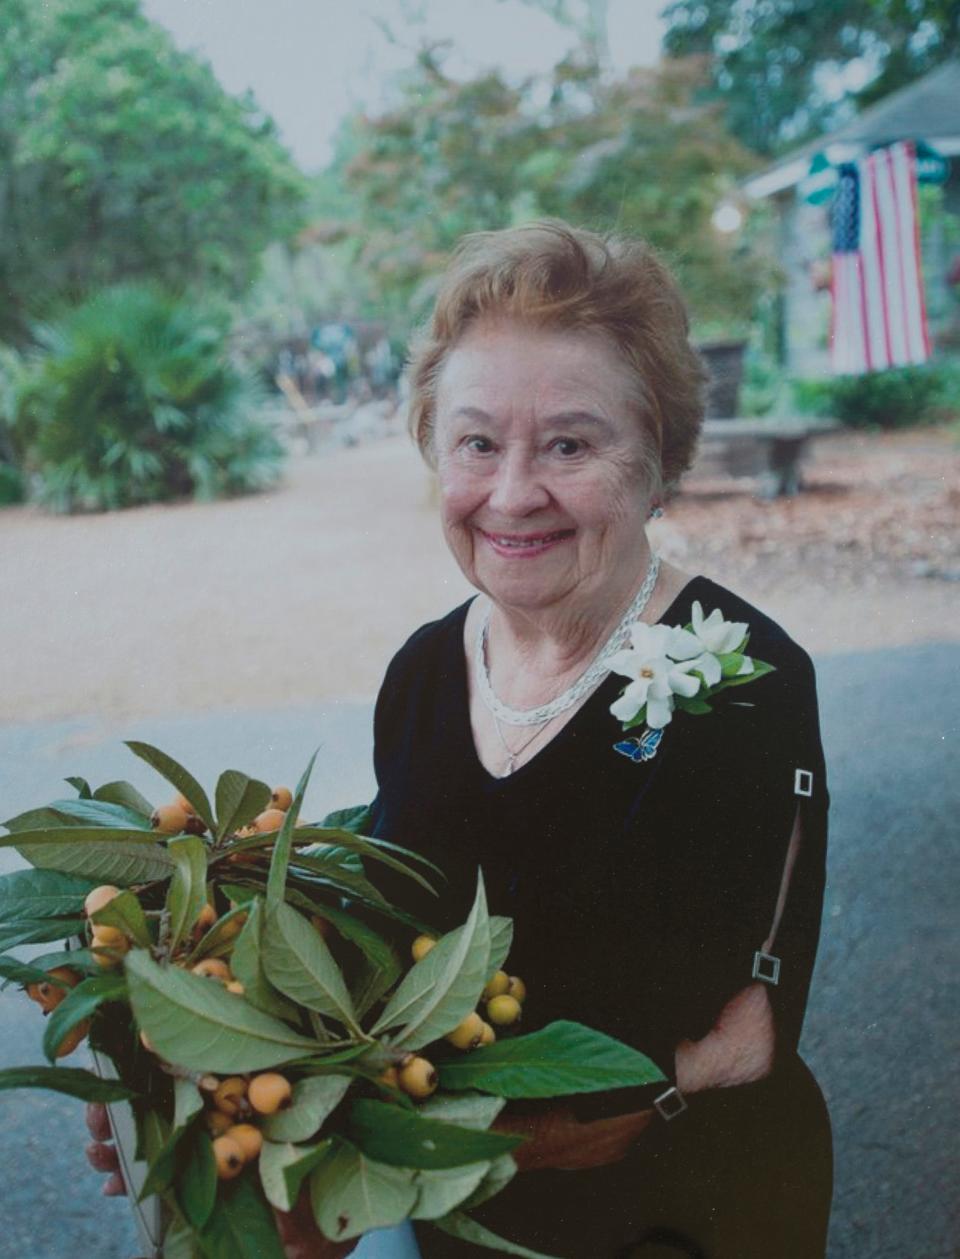 A photo of the late Jean McCully on display in the outside gardens of the newly dedicated Big Bend Hospice family house named in her honor.